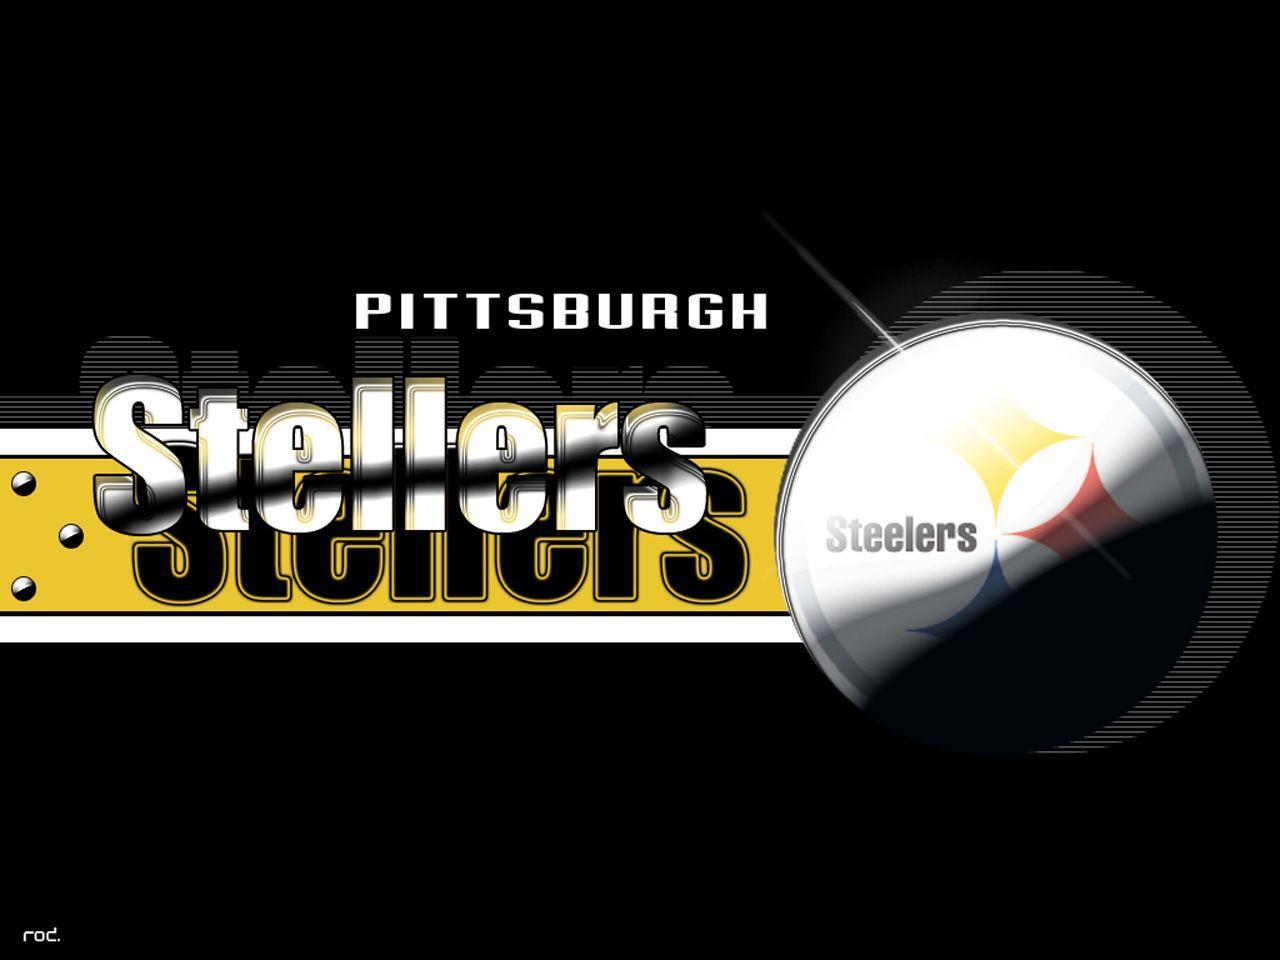 pittsburgh steelers HD wallpaper for iphone. Wallput